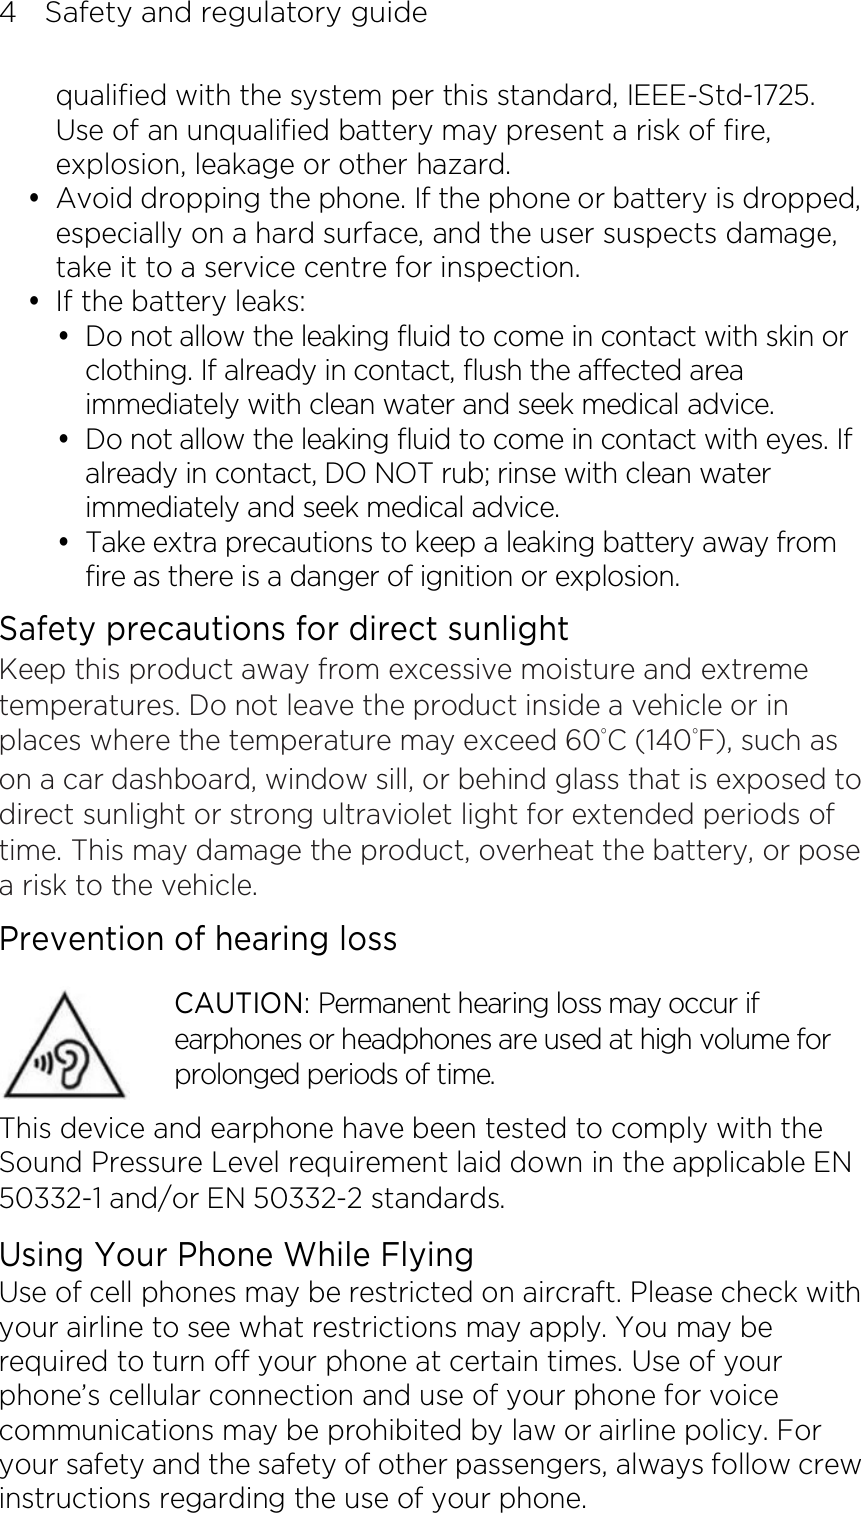 4    Safety and regulatory guide qualified with the system per this standard, IEEE-Std-1725. Use of an unqualified battery may present a risk of fire, explosion, leakage or other hazard.  Avoid dropping the phone. If the phone or battery is dropped, especially on a hard surface, and the user suspects damage, take it to a service centre for inspection.  If the battery leaks:    Do not allow the leaking fluid to come in contact with skin or clothing. If already in contact, flush the affected area immediately with clean water and seek medical advice.    Do not allow the leaking fluid to come in contact with eyes. If already in contact, DO NOT rub; rinse with clean water immediately and seek medical advice.    Take extra precautions to keep a leaking battery away from fire as there is a danger of ignition or explosion.   Safety precautions for direct sunlight Keep this product away from excessive moisture and extreme temperatures. Do not leave the product inside a vehicle or in places where the temperature may exceed 60°C (140°F), such as on a car dashboard, window sill, or behind glass that is exposed to direct sunlight or strong ultraviolet light for extended periods of time. This may damage the product, overheat the battery, or pose a risk to the vehicle. Prevention of hearing loss CAUTION: Permanent hearing loss may occur if earphones or headphones are used at high volume for prolonged periods of time. This device and earphone have been tested to comply with the Sound Pressure Level requirement laid down in the applicable EN 50332-1 and/or EN 50332-2 standards. Using Your Phone While Flying Use of cell phones may be restricted on aircraft. Please check with your airline to see what restrictions may apply. You may be required to turn off your phone at certain times. Use of your phone’s cellular connection and use of your phone for voice communications may be prohibited by law or airline policy. For your safety and the safety of other passengers, always follow crew instructions regarding the use of your phone. 